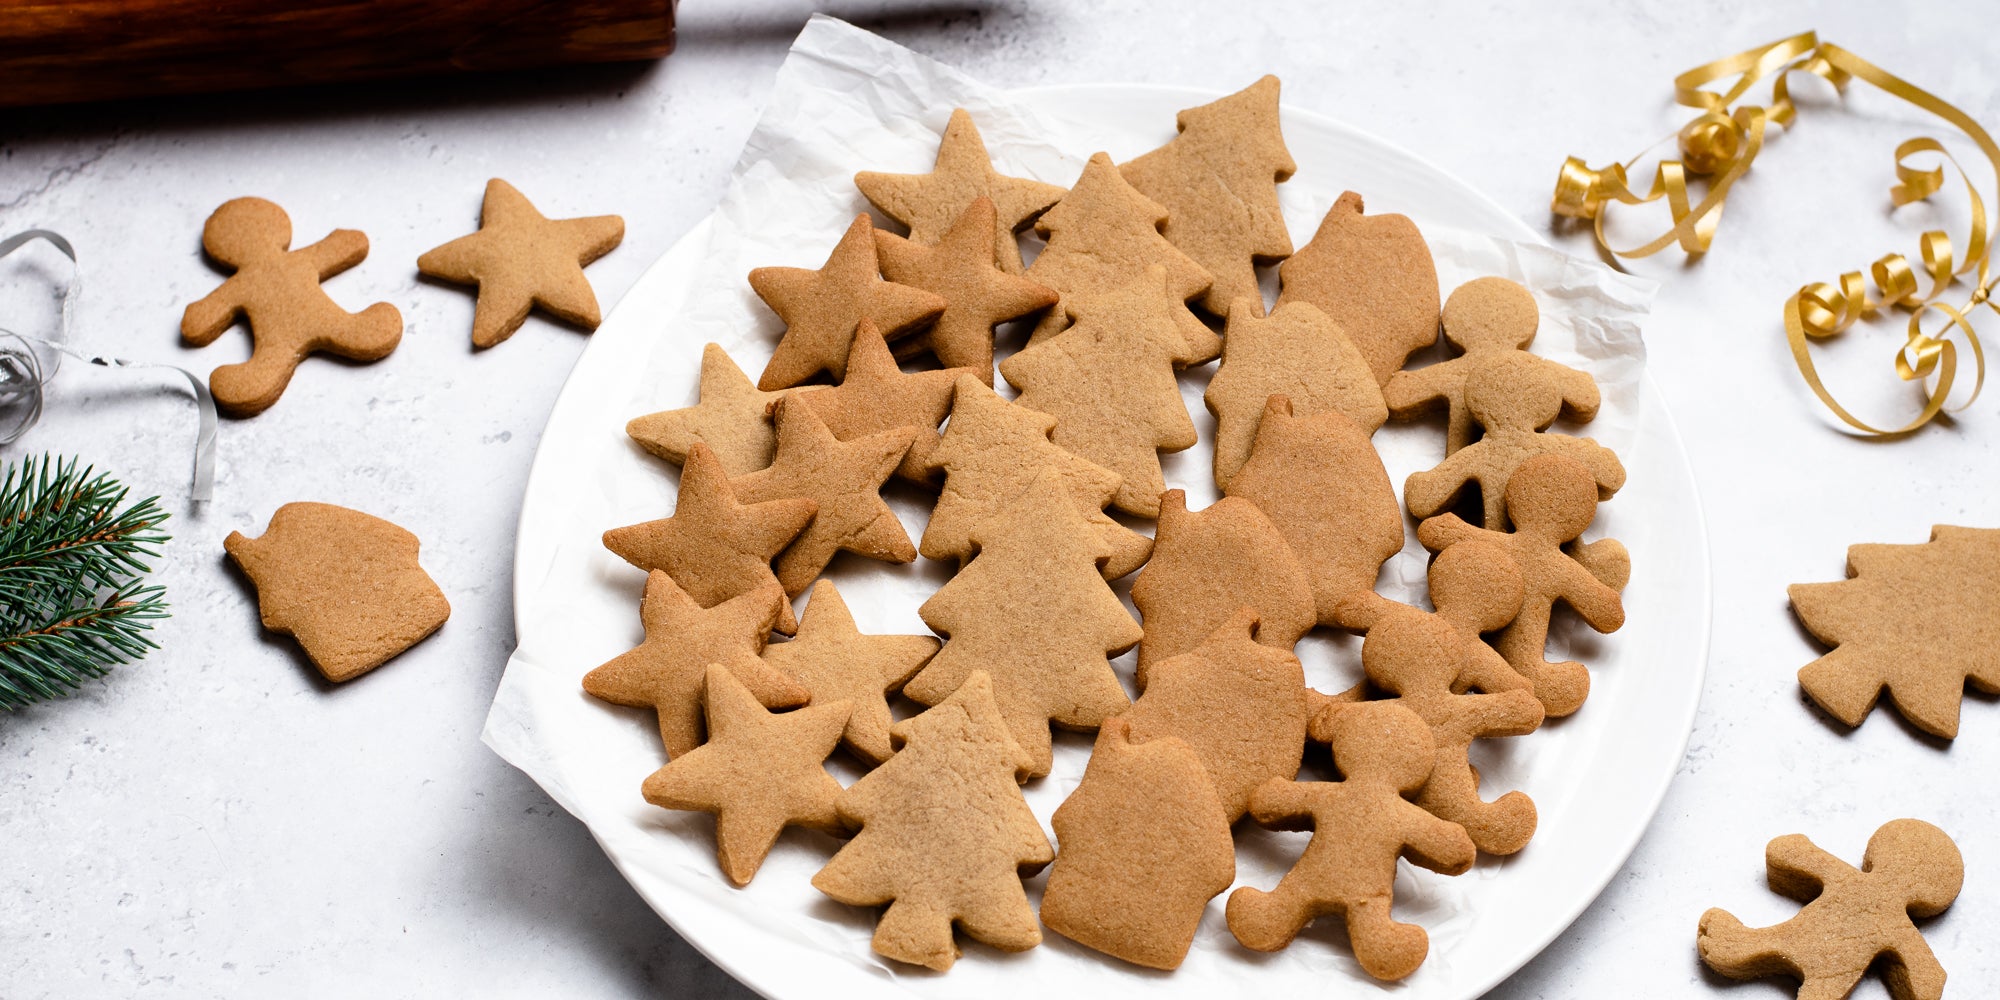 A batch of gingerbread cookies baked from Gingerbread Dough, next to gold ribbon and pine leaves